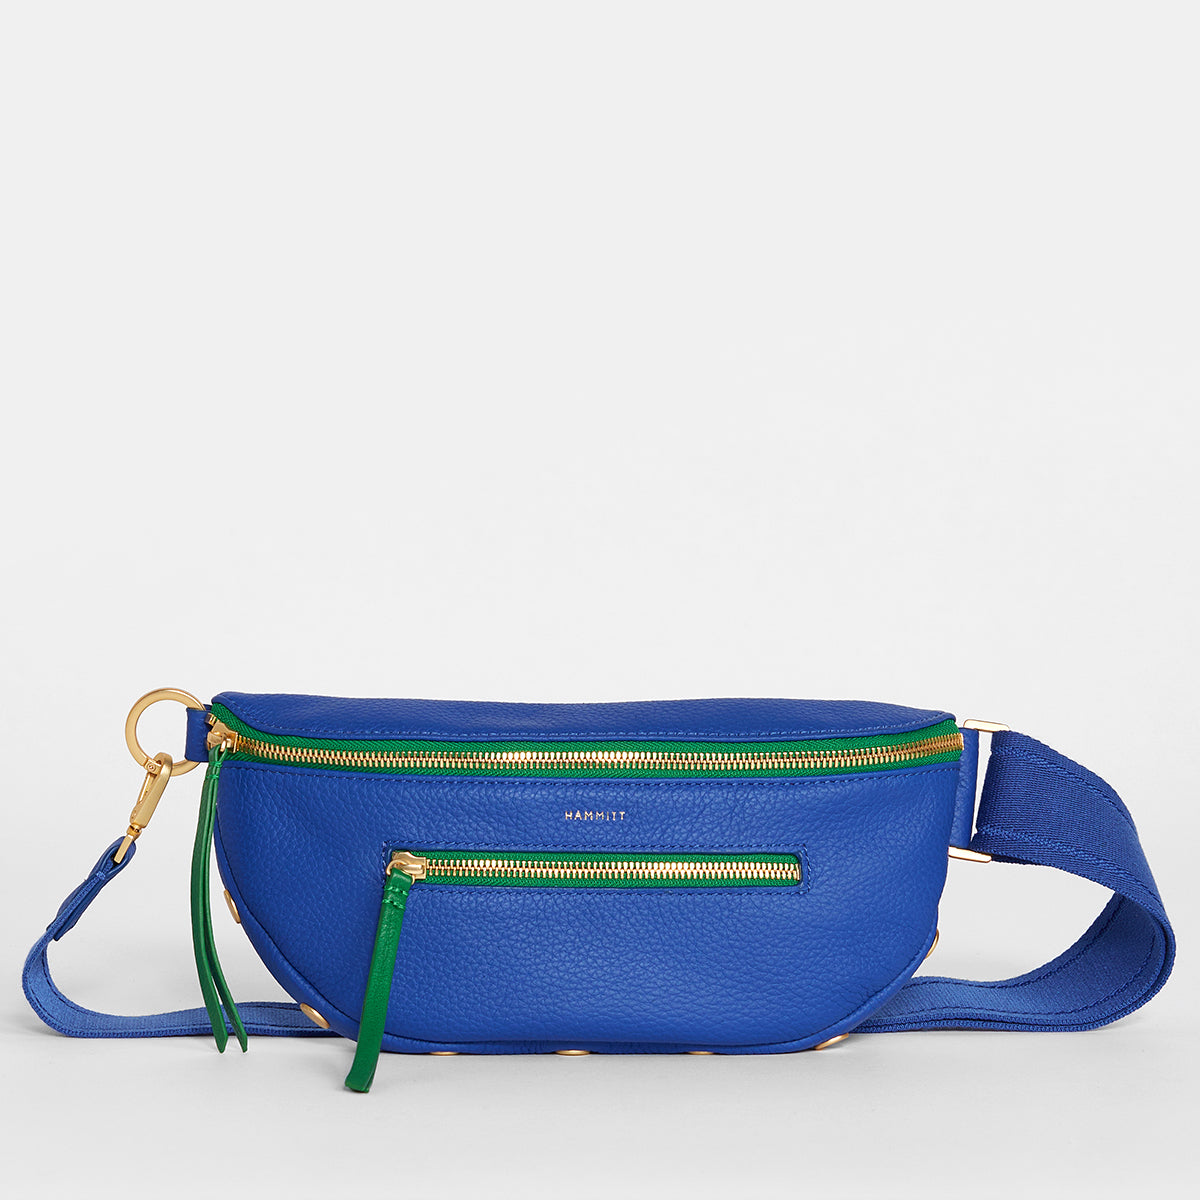 Charles-Crossbody-Avenue-Blue-Front-View